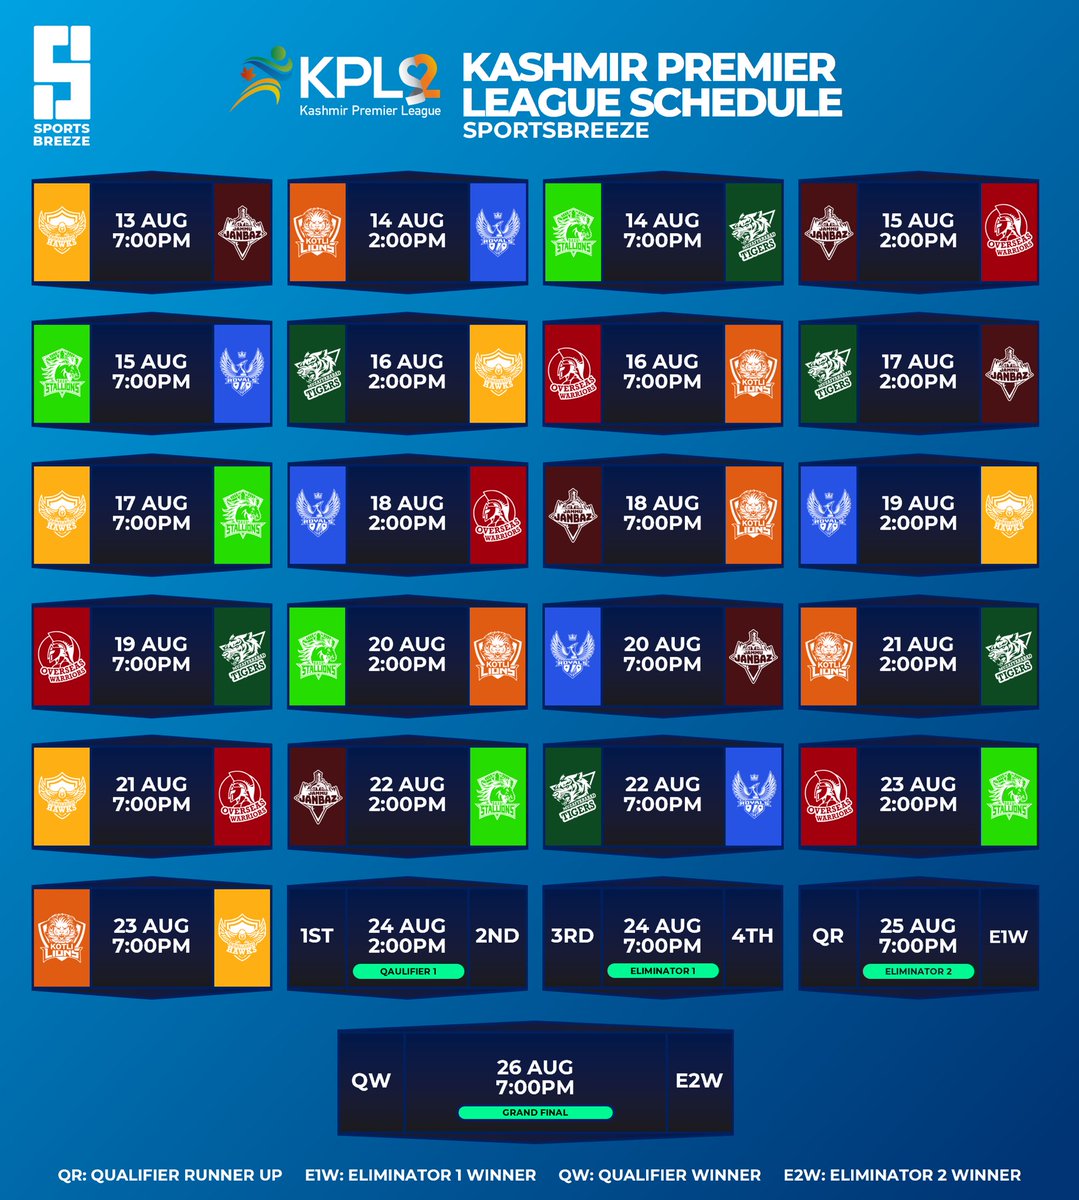 Kashmir Premier League action is all set to start this Saturday. Who will you be supporting this season 🏏?

•

#sportsbreeze #pakistancricketteam #pakistancricketboard #pcb #psl #t20worldcup #pakistanjuniorleague #pakvnl  #asiacup #kpl #kashmirpremierleague #kashmir